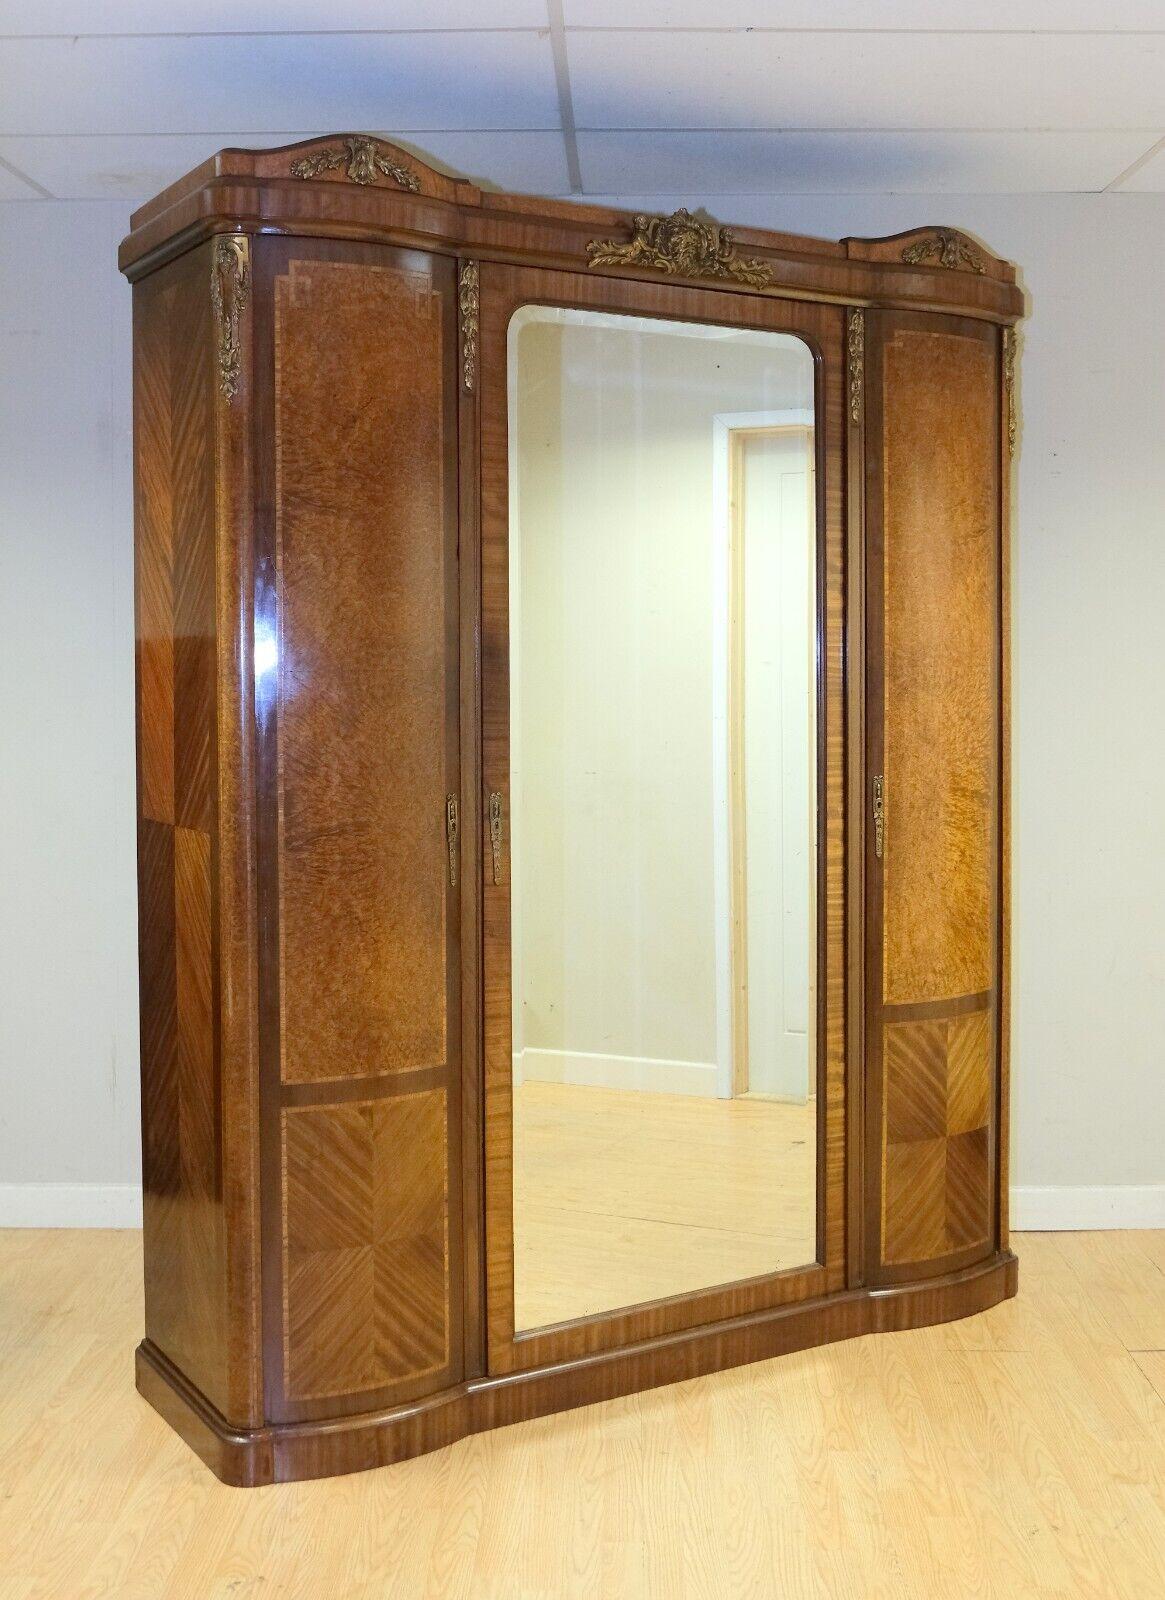 We are delighted to offer for sale this stunning 19th-century French triple wardrobe with gilt molds and a central door mirror. 

For start, this stunning piece is gorgeous from any point of view as it is well presented with a lovely mold of angels,